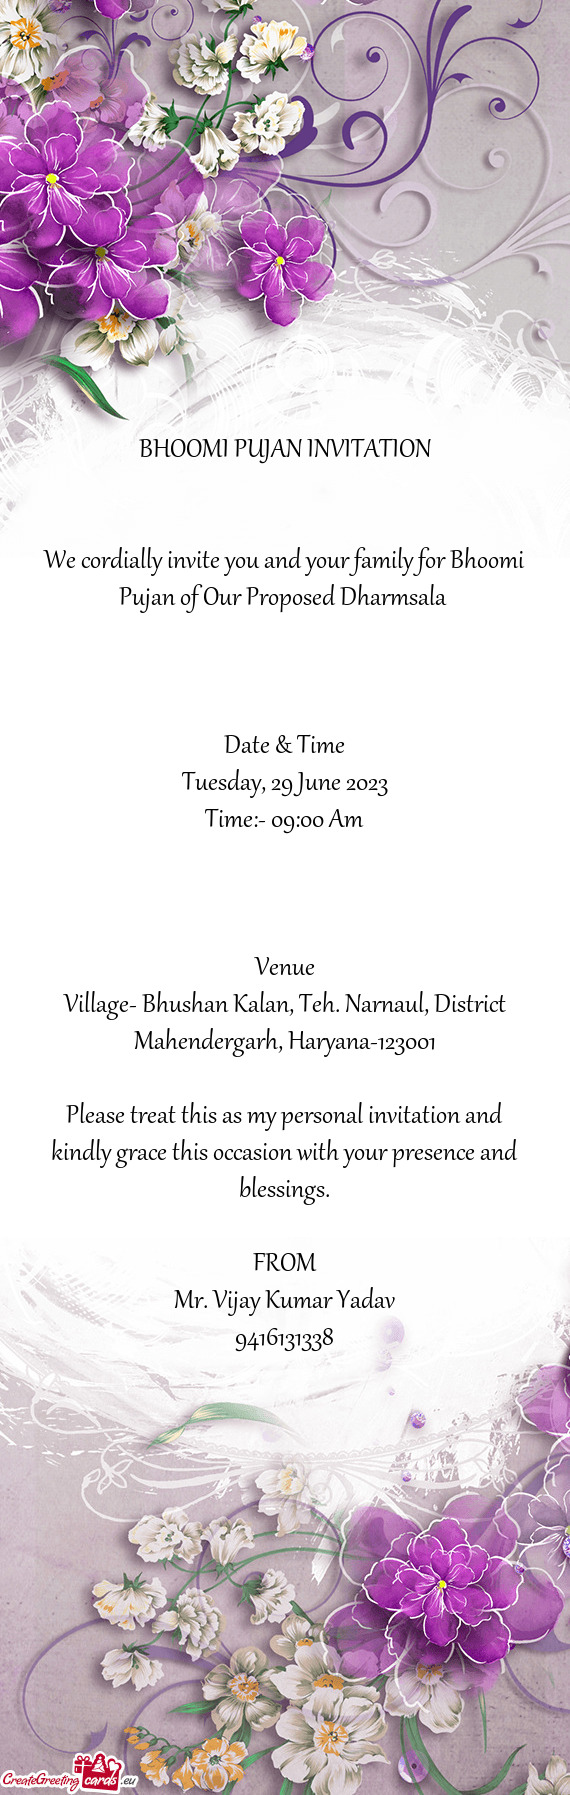 We cordially invite you and your family for Bhoomi Pujan of Our Proposed Dharmsala